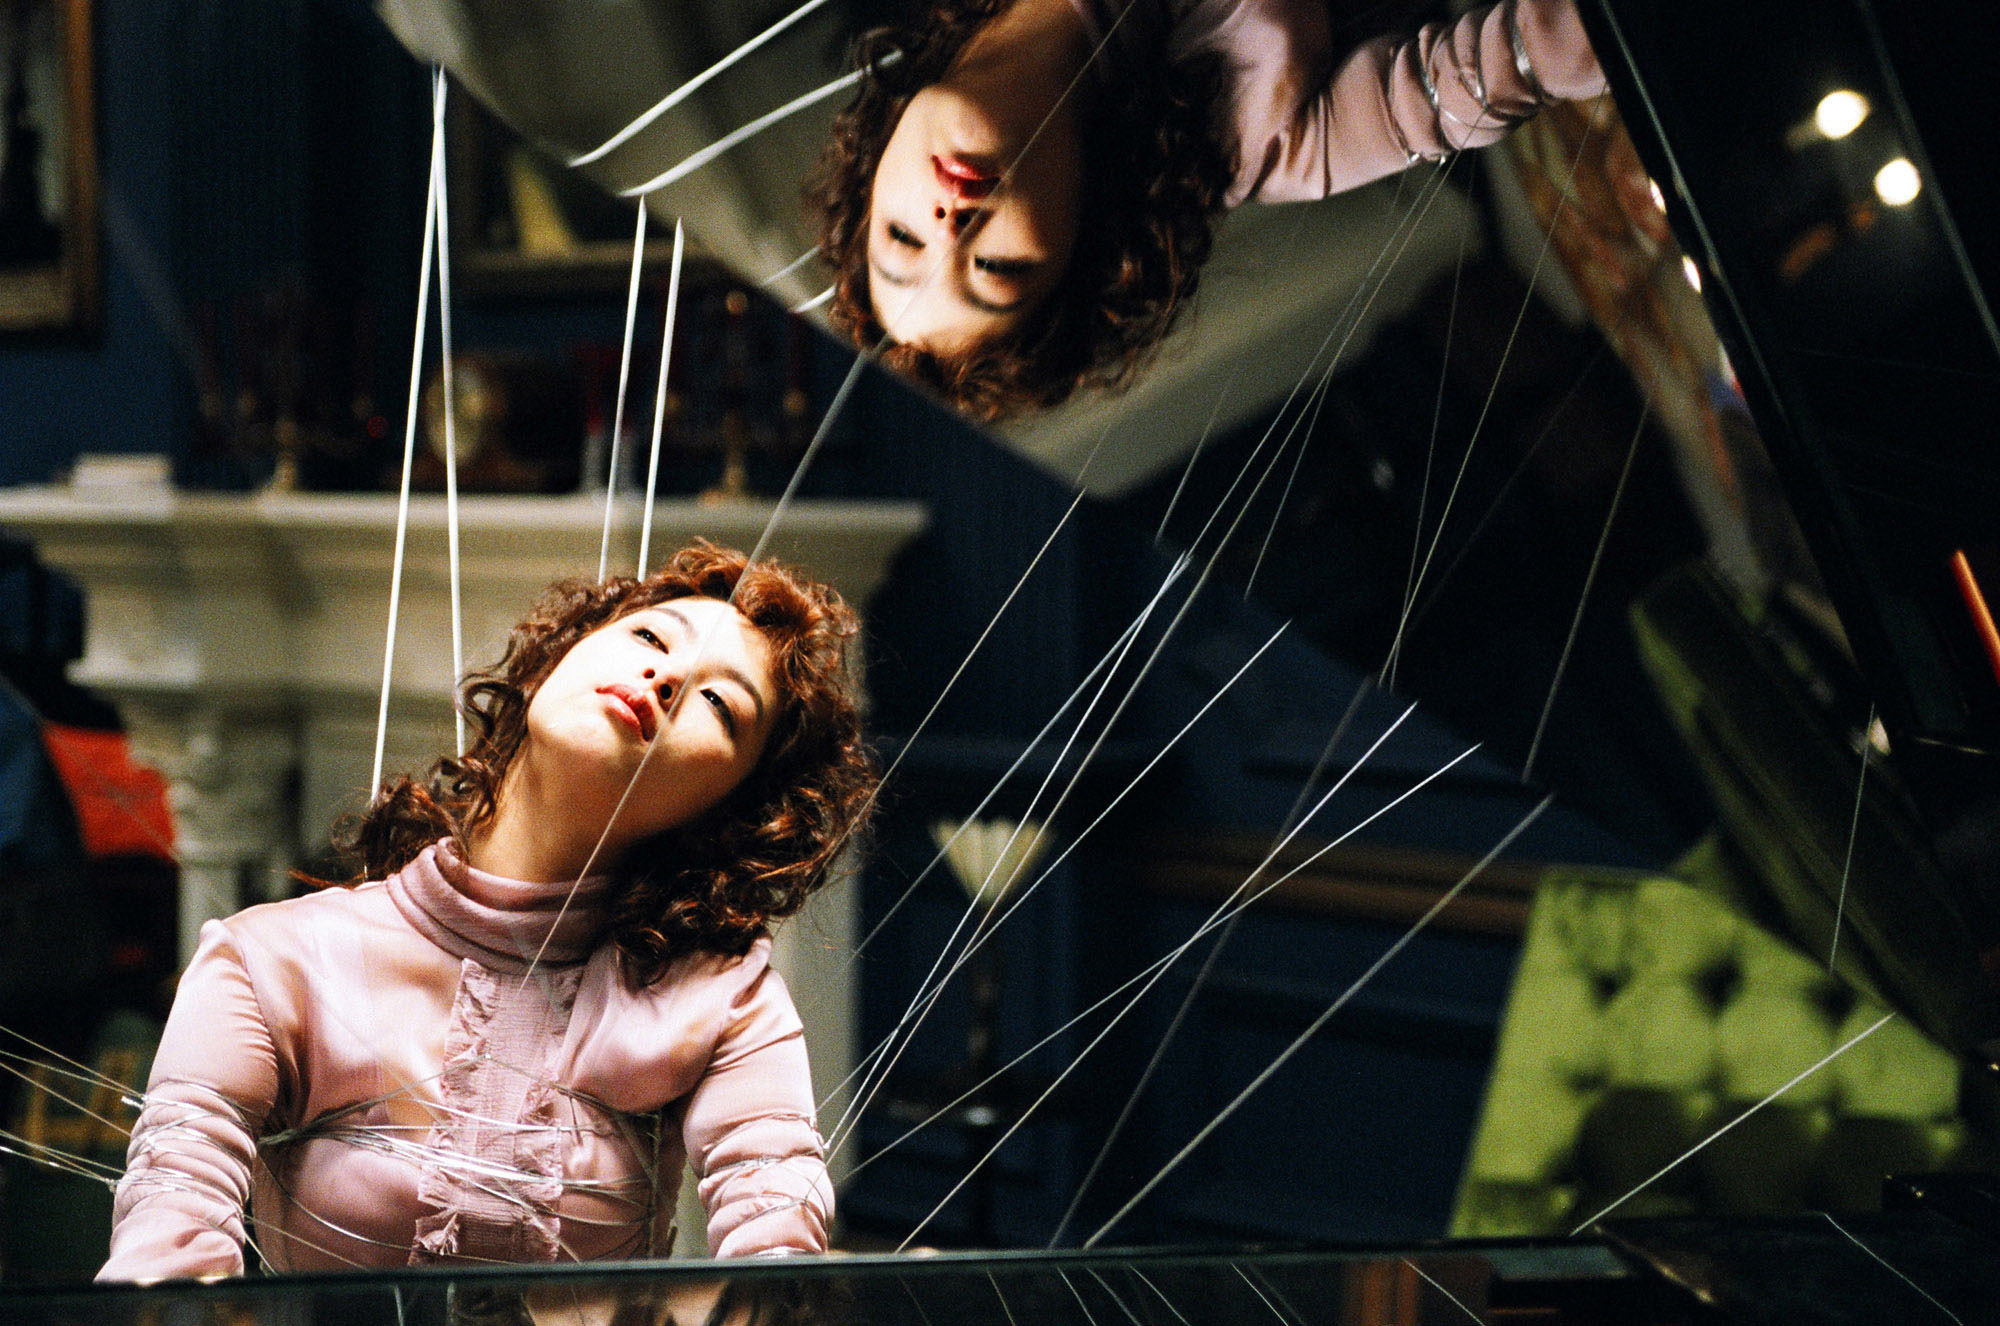 An barely conscious woman is stuck to a pianoand a number of wires